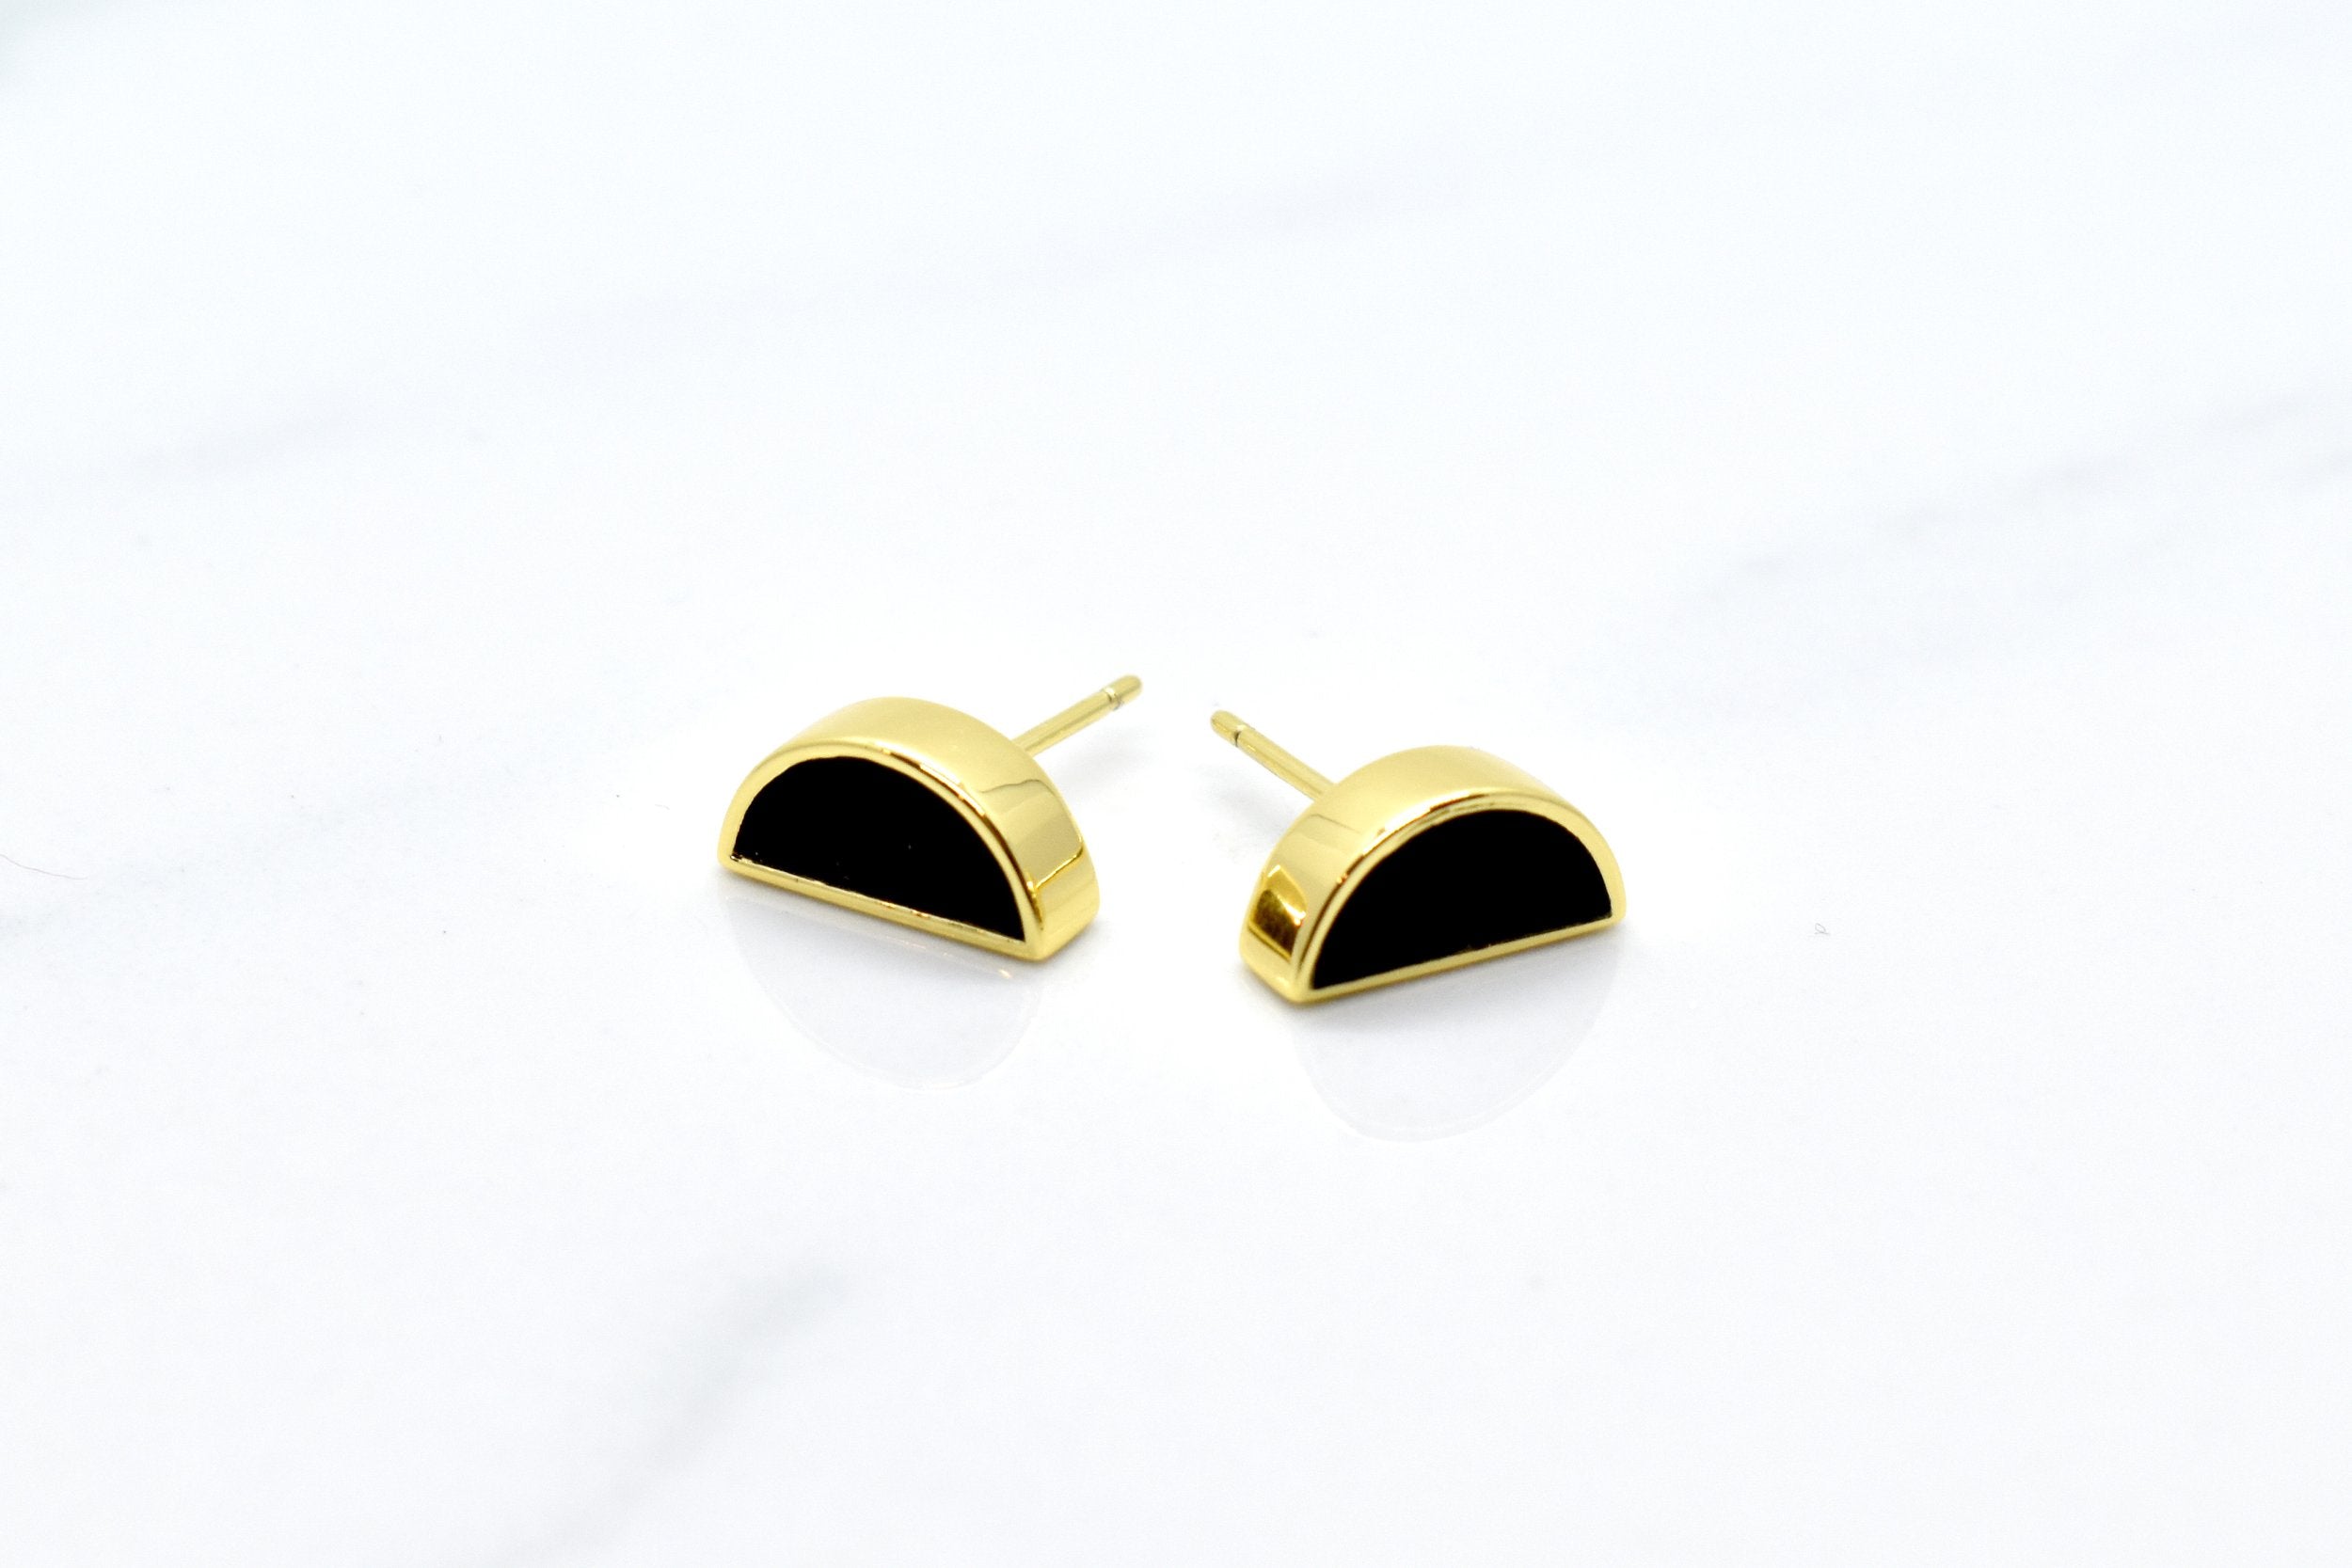 half moon stud earring set made of 14k gold and clay black gold earrings